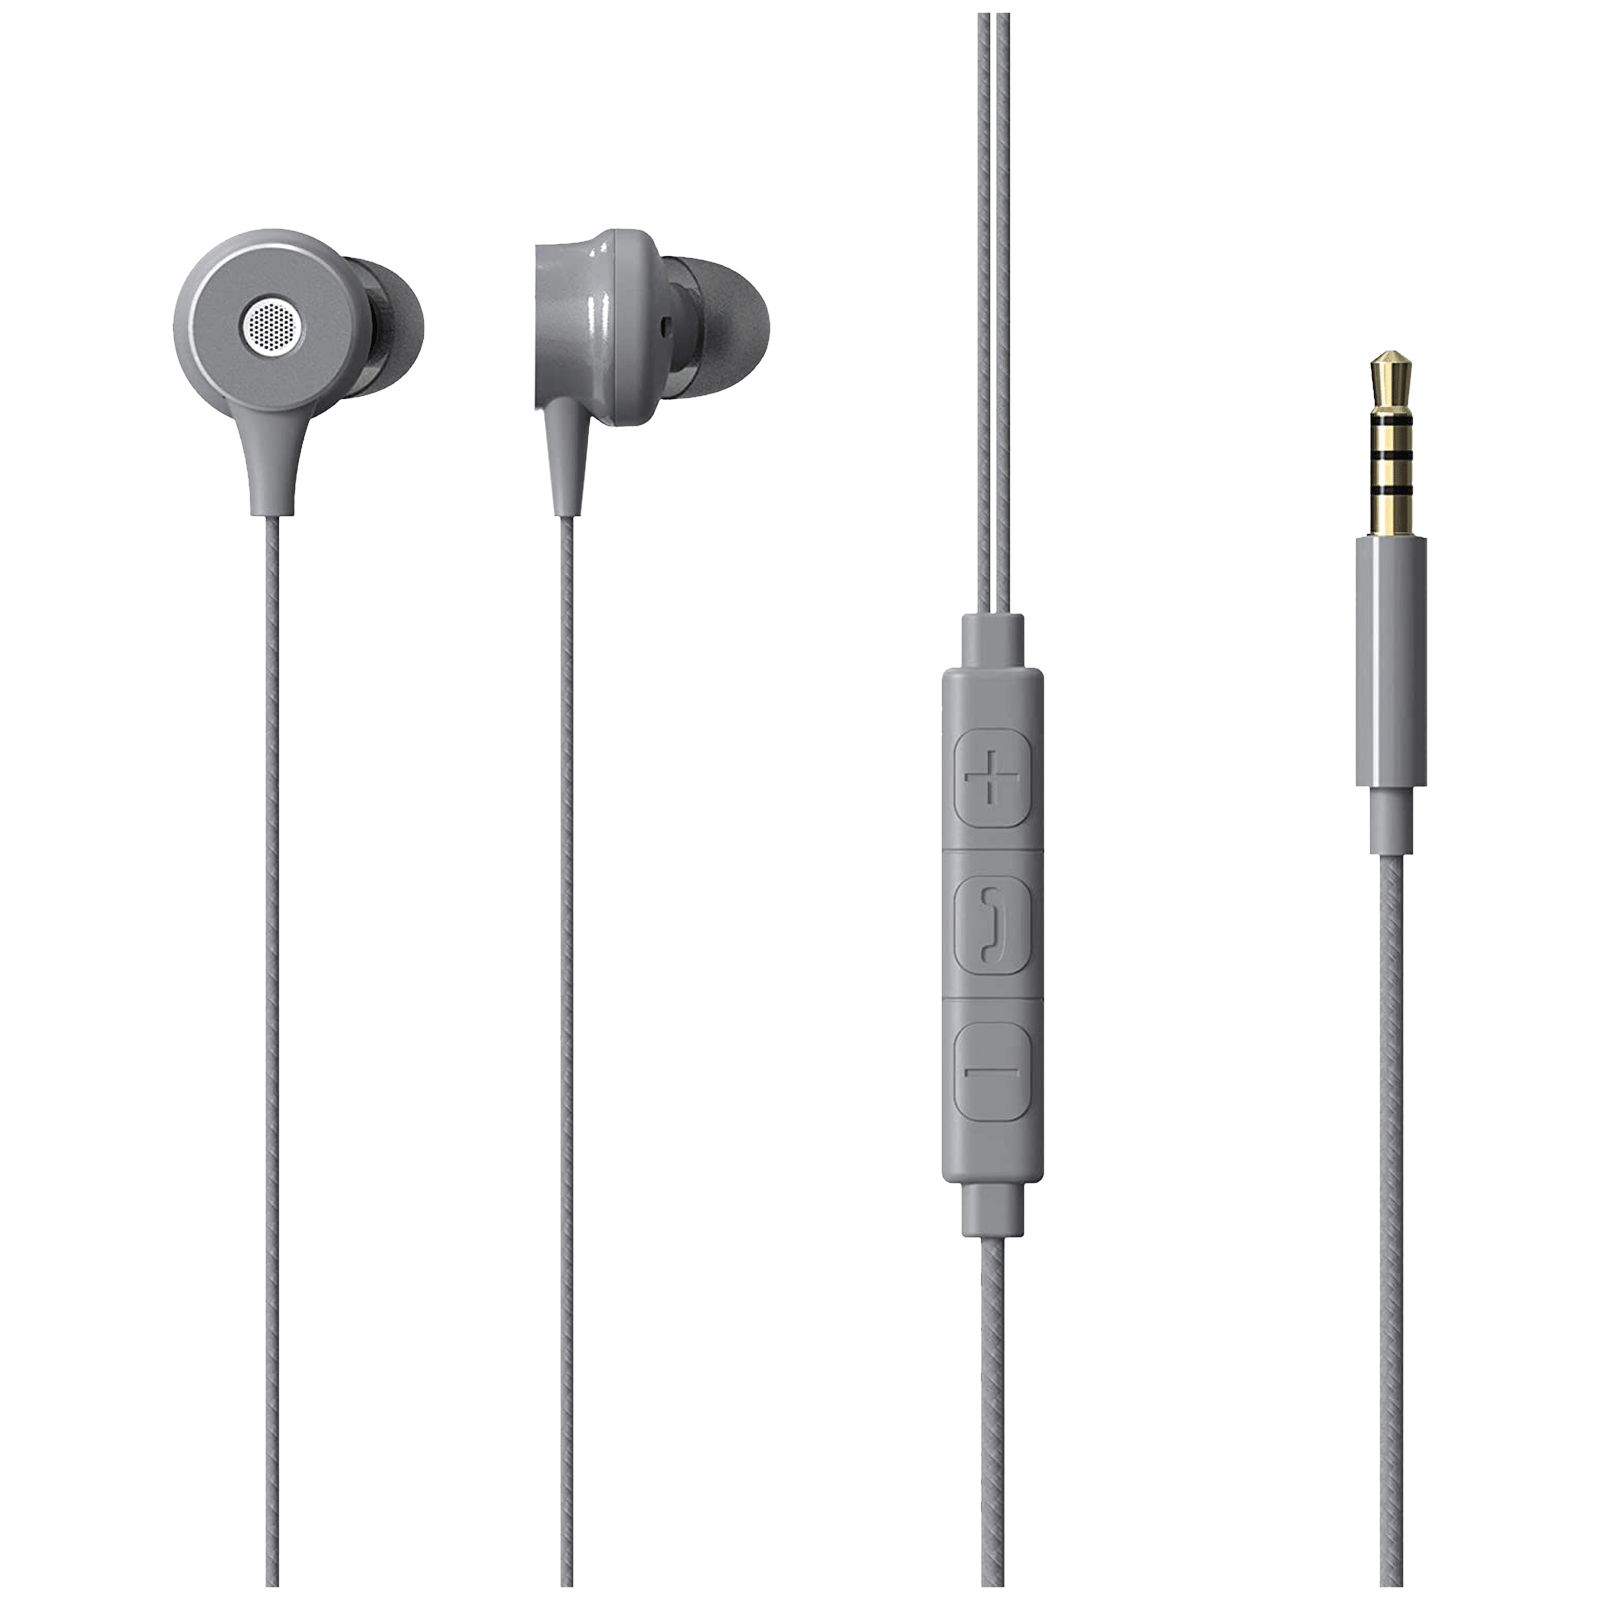 ZEBRONICS Buds 20 Wired Earphone with Mic (In Ear, Gray)